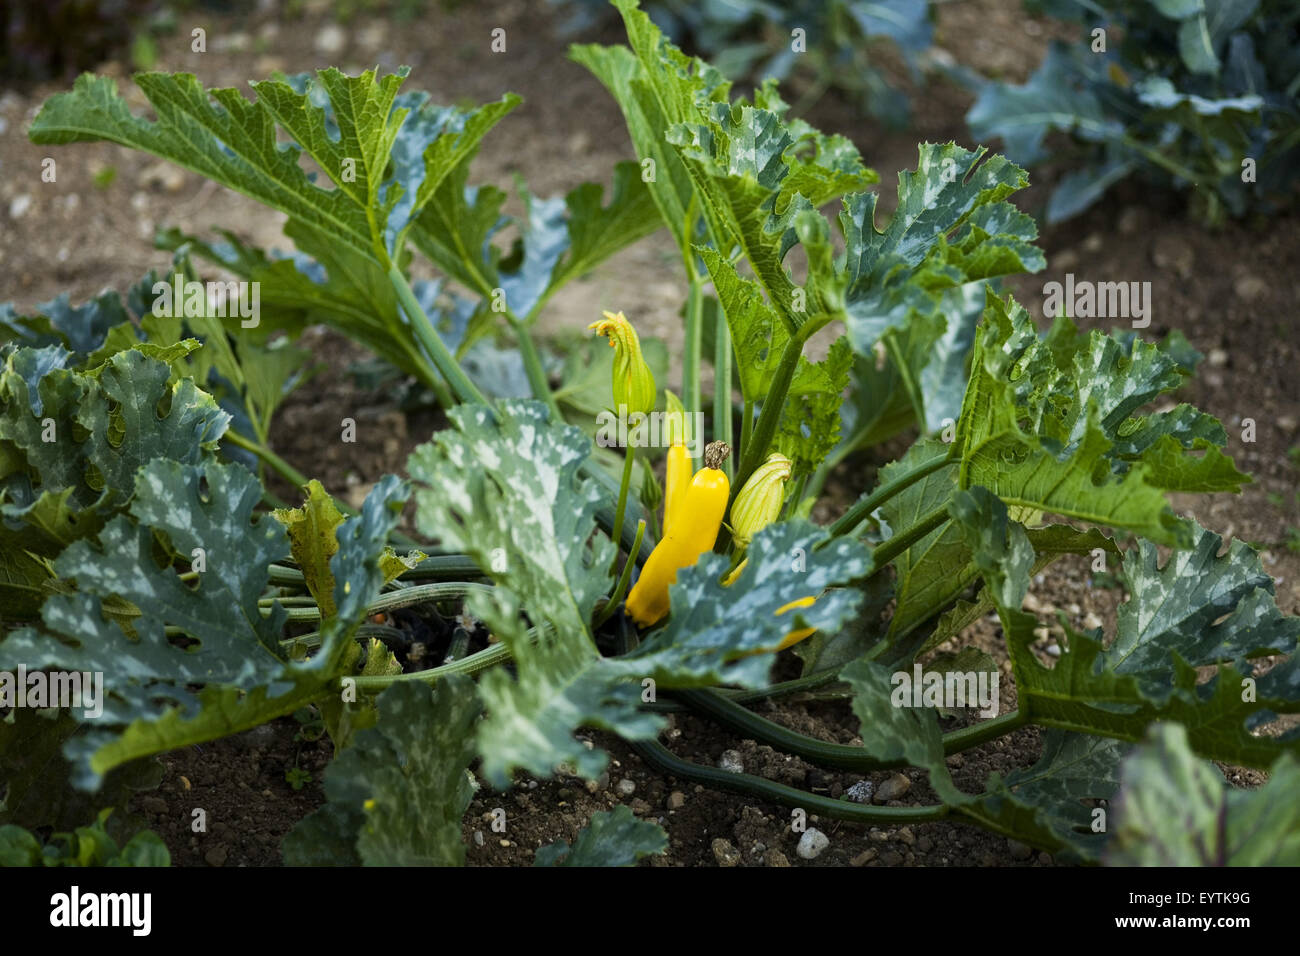 Zucchini plant in the garden bed Stock Photo